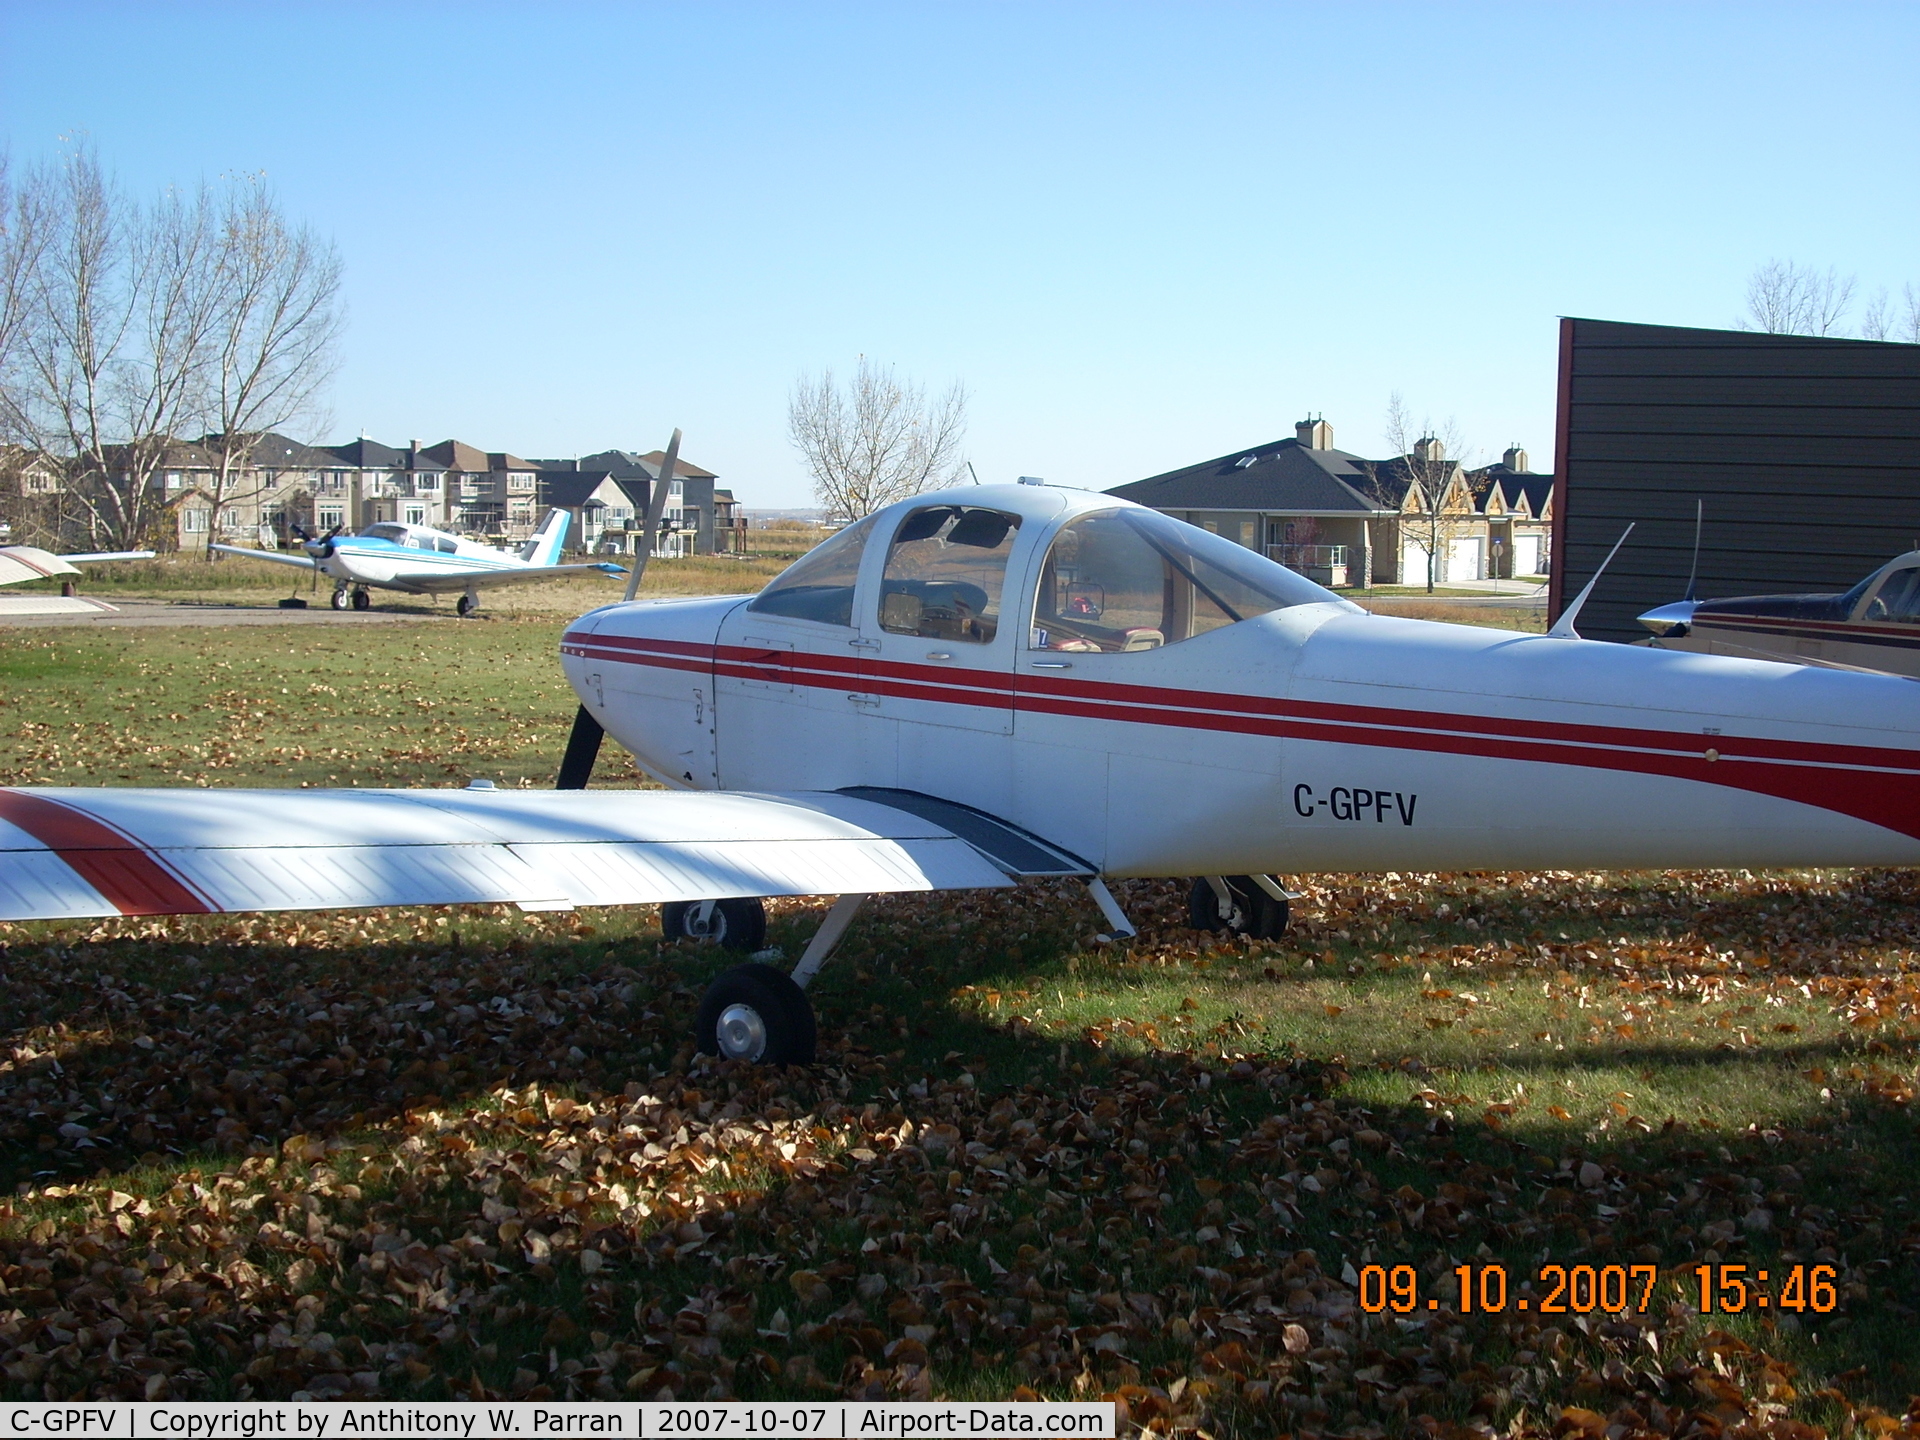 C-GPFV, 1978 Piper PA-38-112 Tomahawk Tomahawk C/N 38-79A0388, Just sitting there